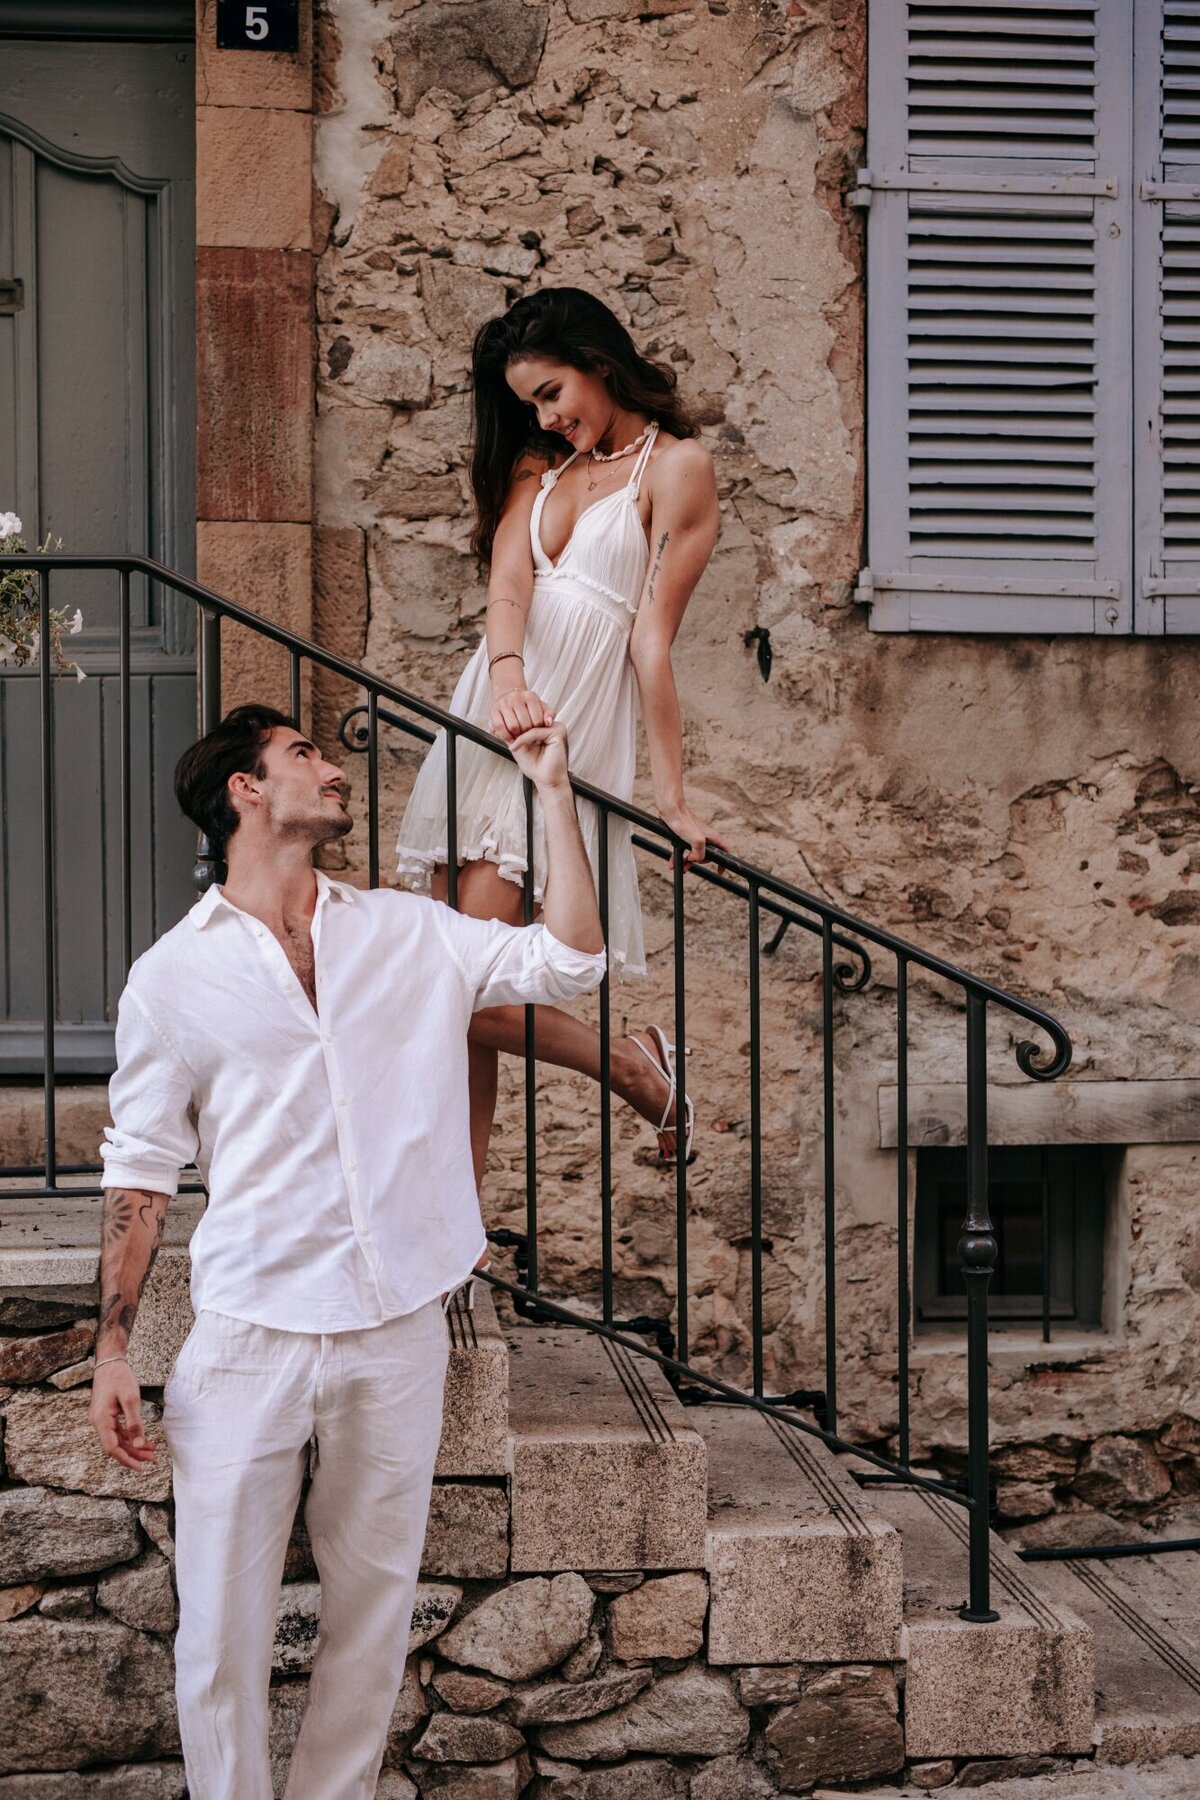 Woman at the top of the stairs looking down and holding onto her fiance as he stands in front of the staircase.